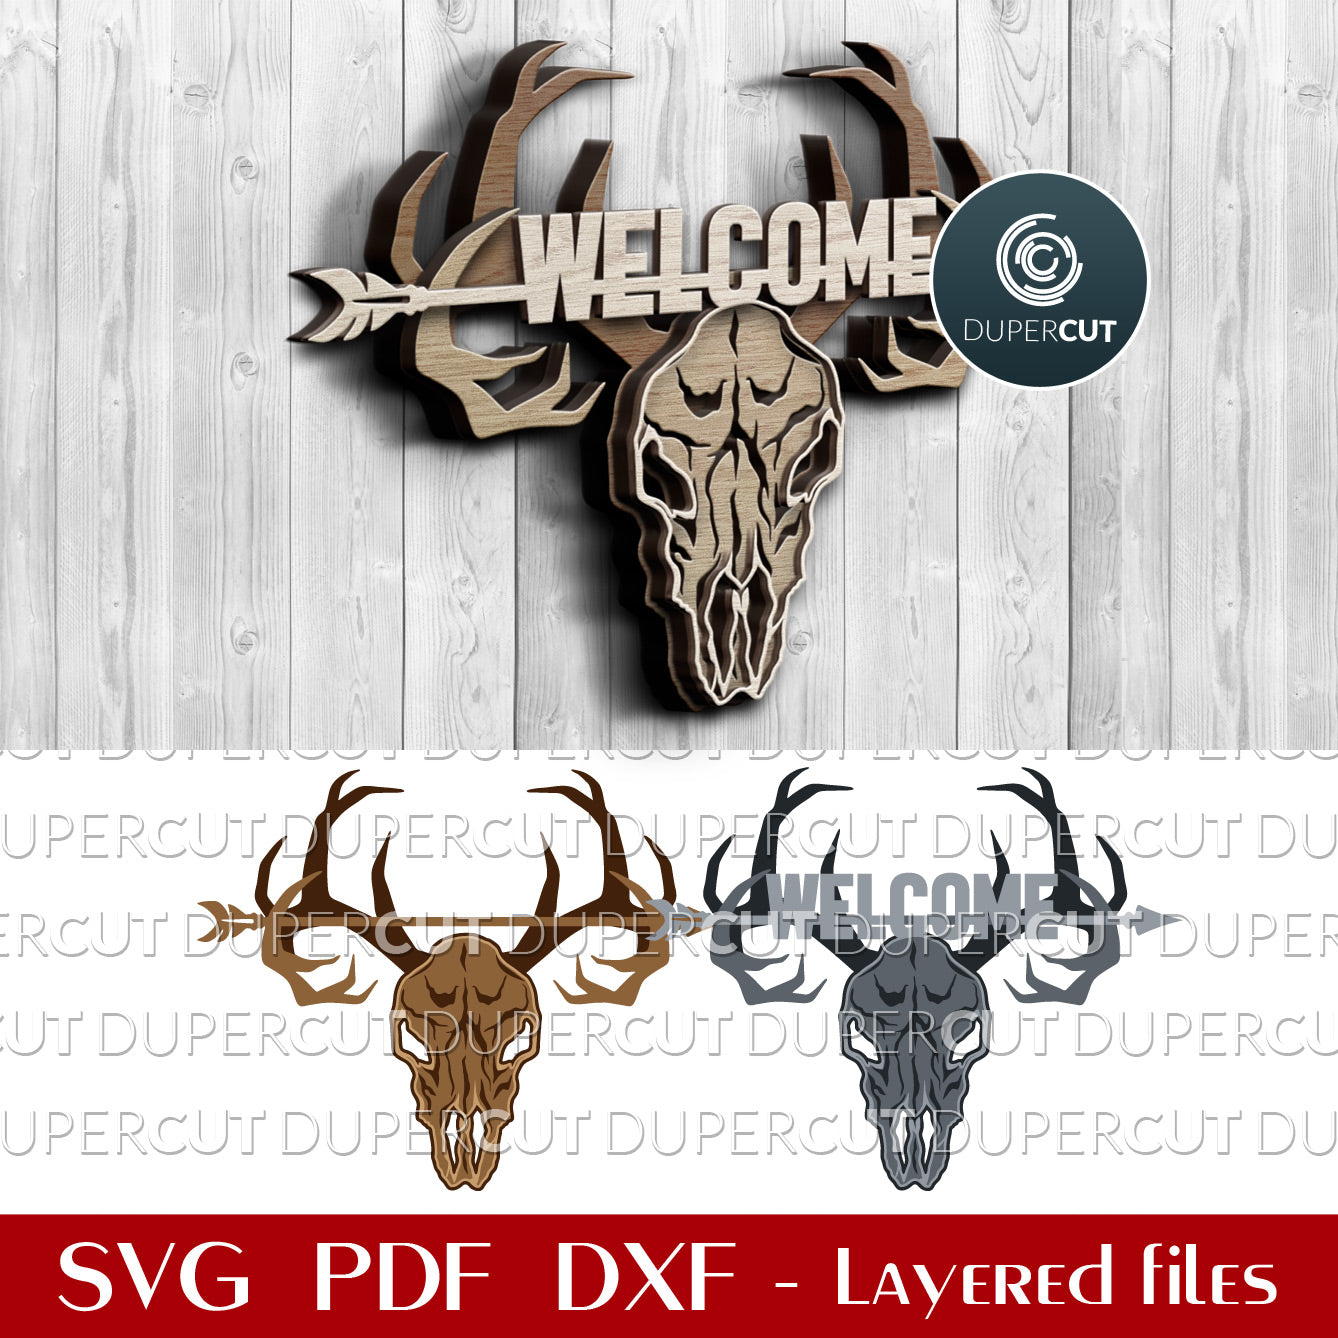 Layered deer skull welcome sign - SVG PDF DXF laser cutting files for Glowforge, Cricut, Silhouette Cameo, CNC plasma machines by DuperCut